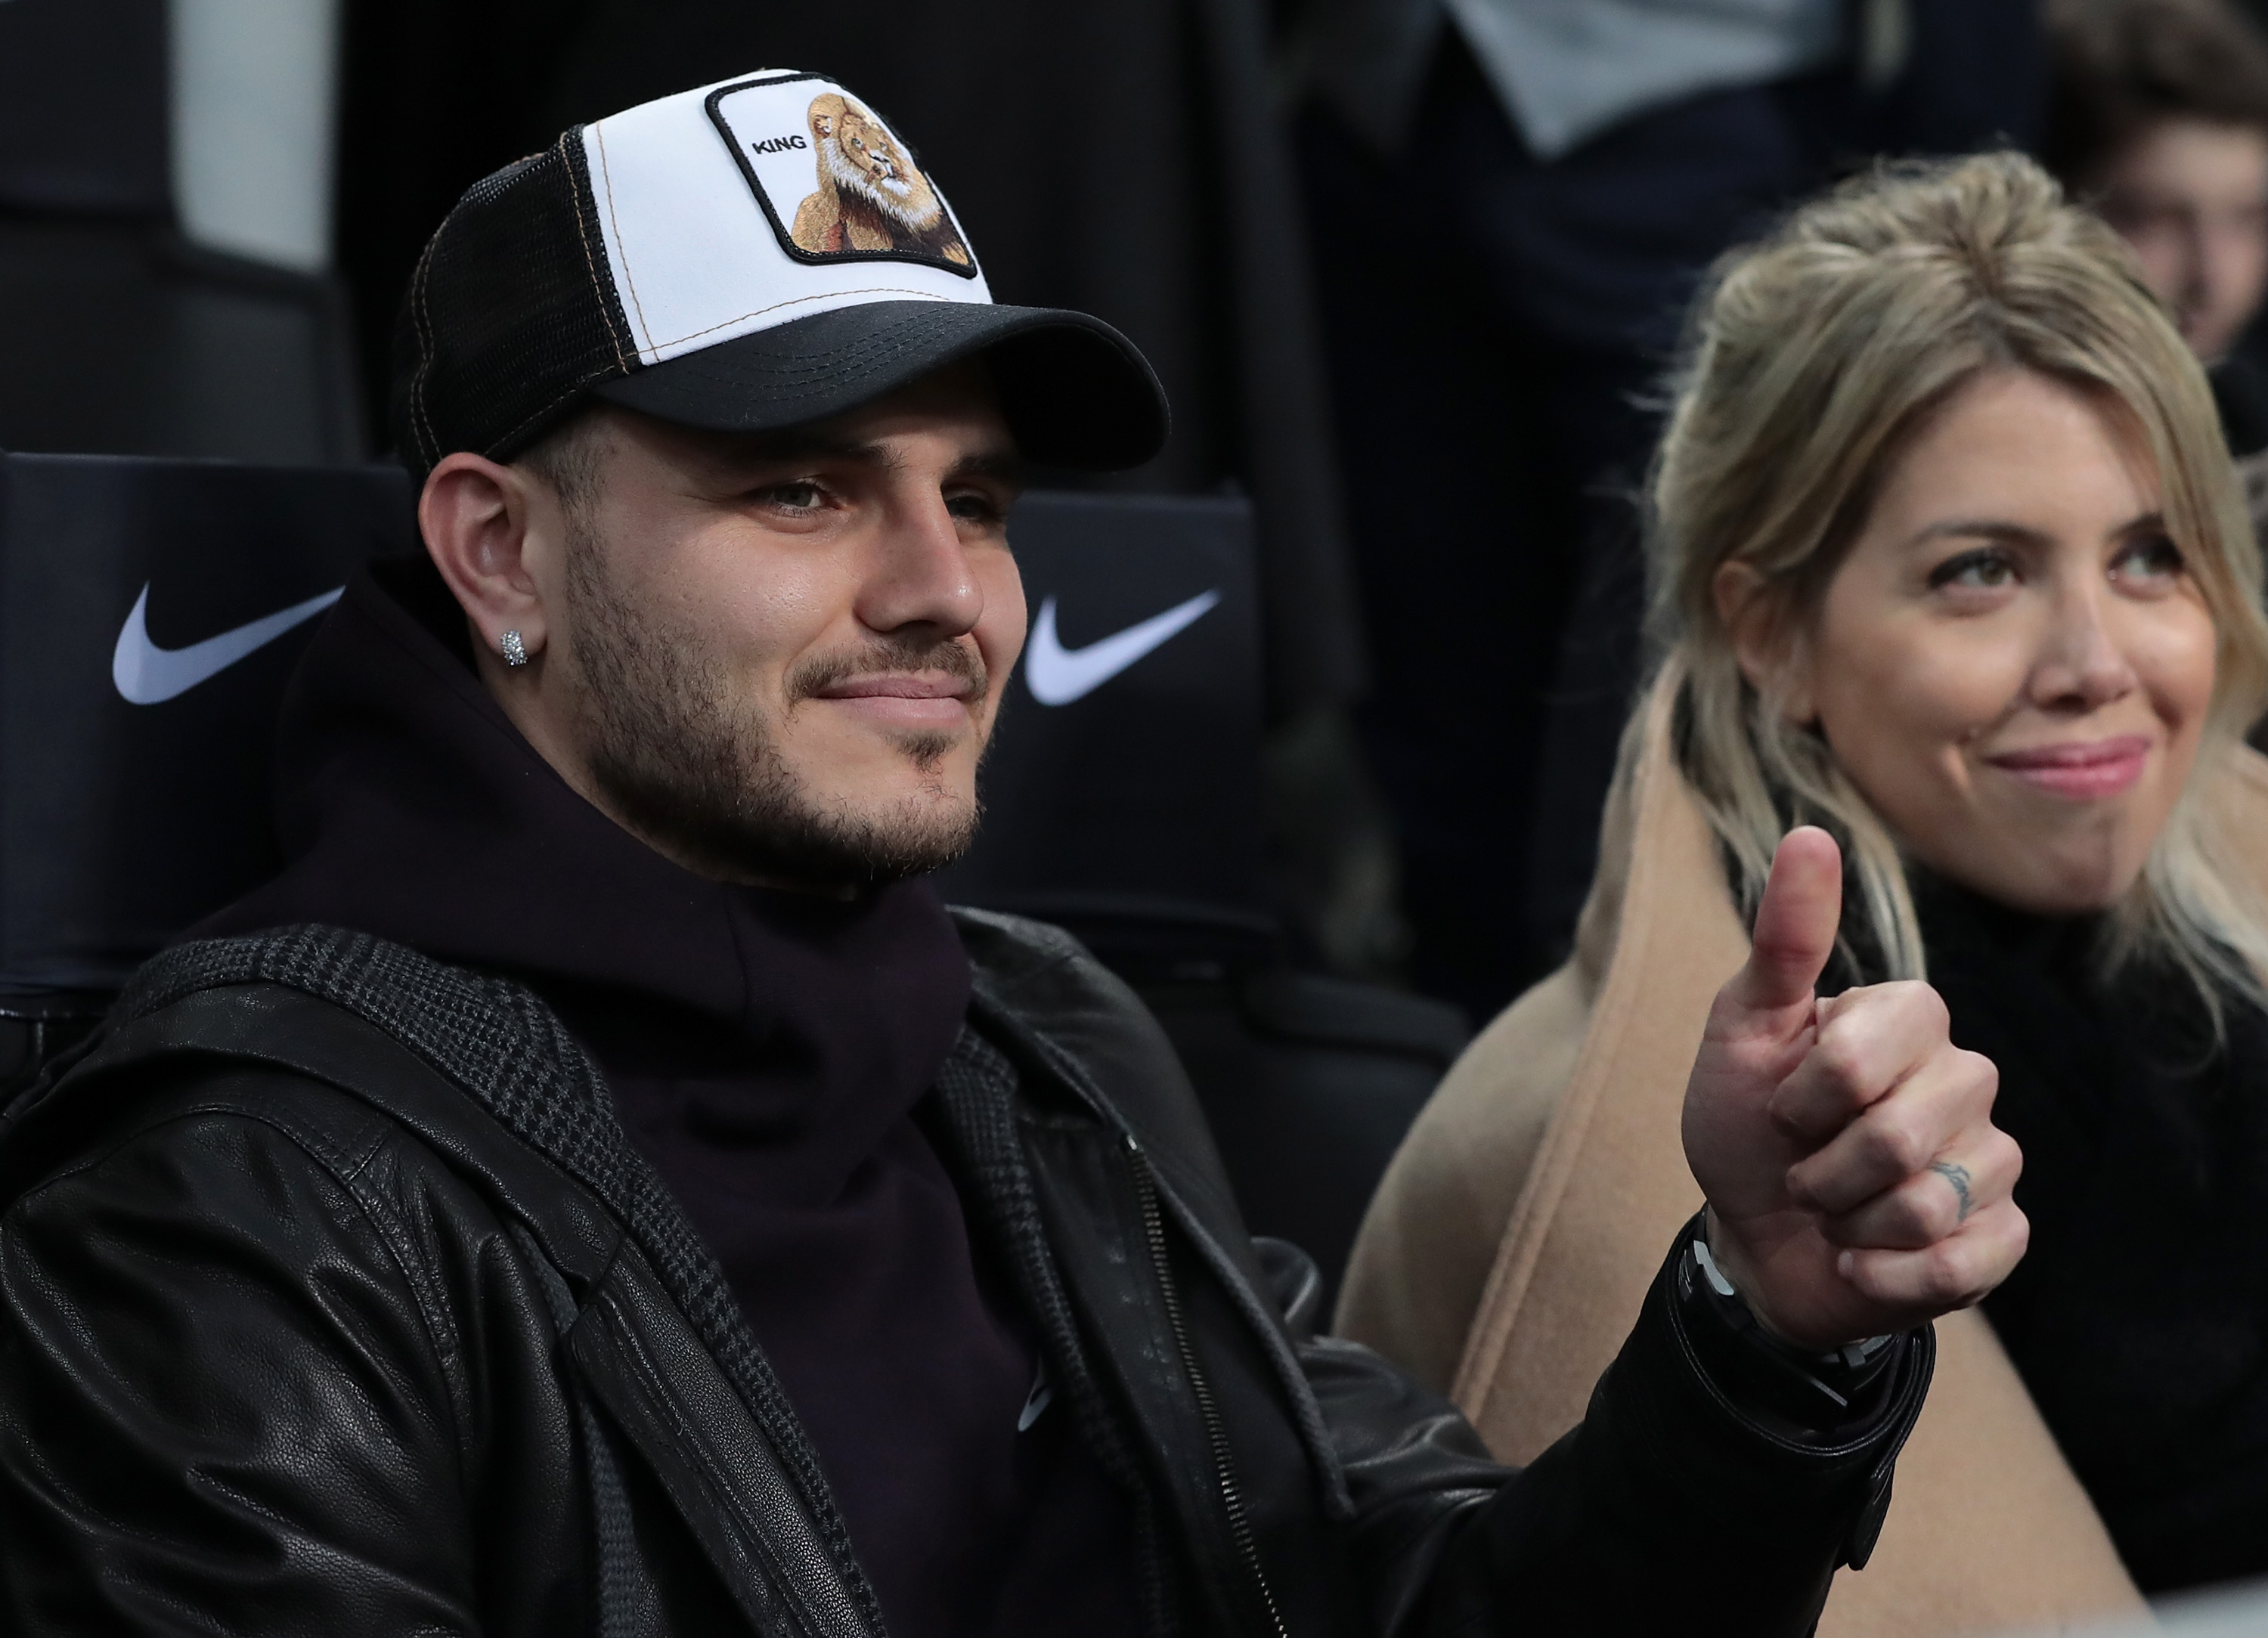 MILAN, ITALY - FEBRUARY 17:  Mauro Emanuel Icardi of FC Internazionale and his wife Wanda Nara attend the Serie A match between FC Internazionale and UC Sampdoria at Stadio Giuseppe Meazza on February 17, 2019 in Milan, Italy.  (Photo by Emilio Andreoli/Getty Images)